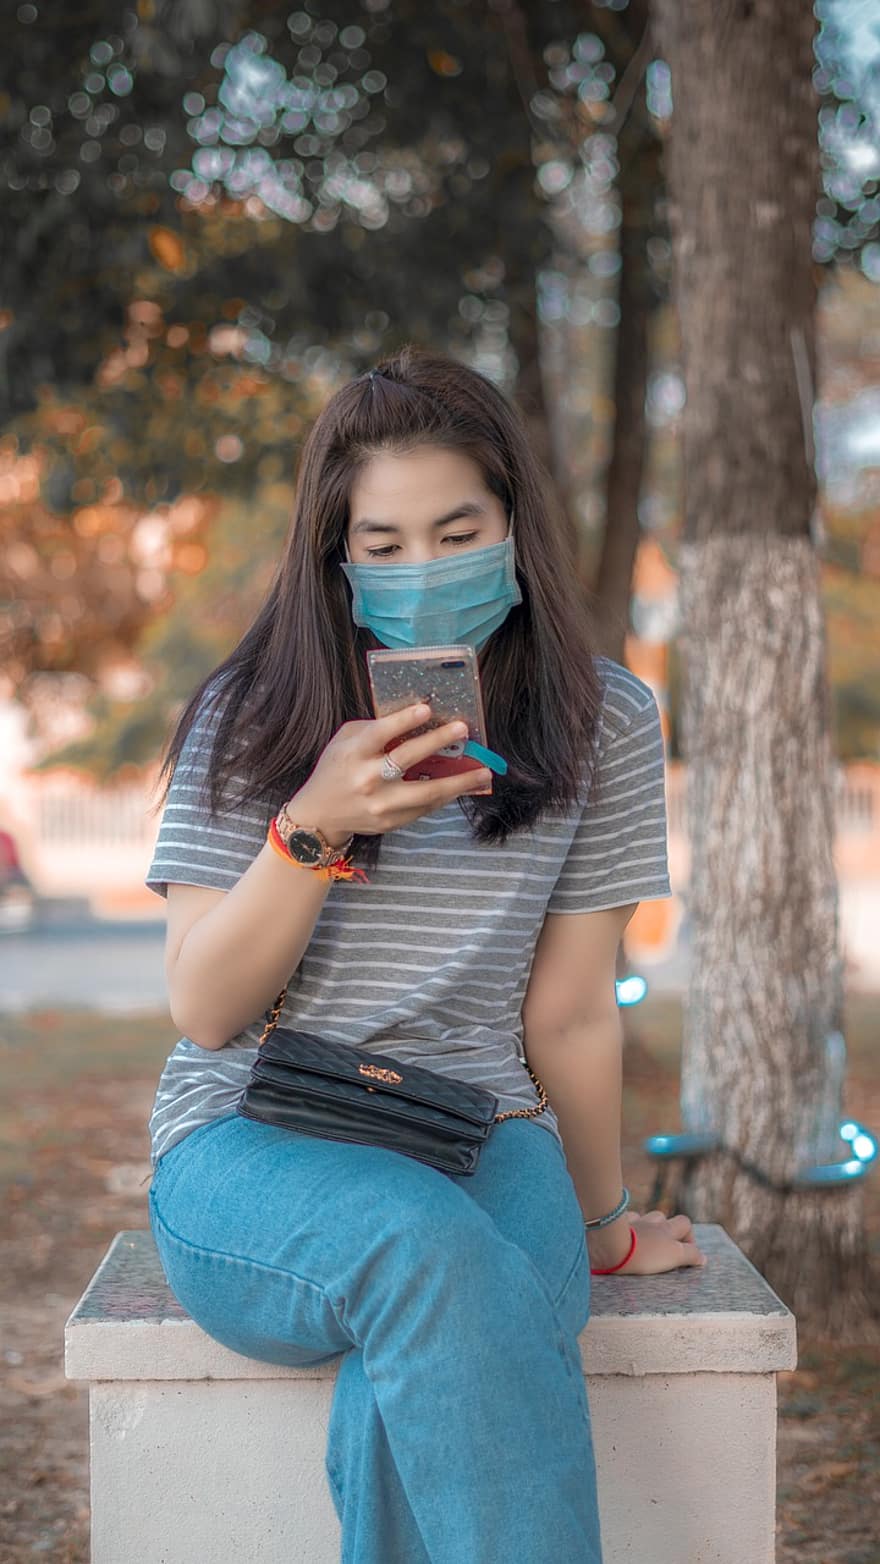 Woman, Face Mask, Smartphone, Waiting, Bench, Park, Girl, Mobile Phone, Cellphone, Mask, Pandemic